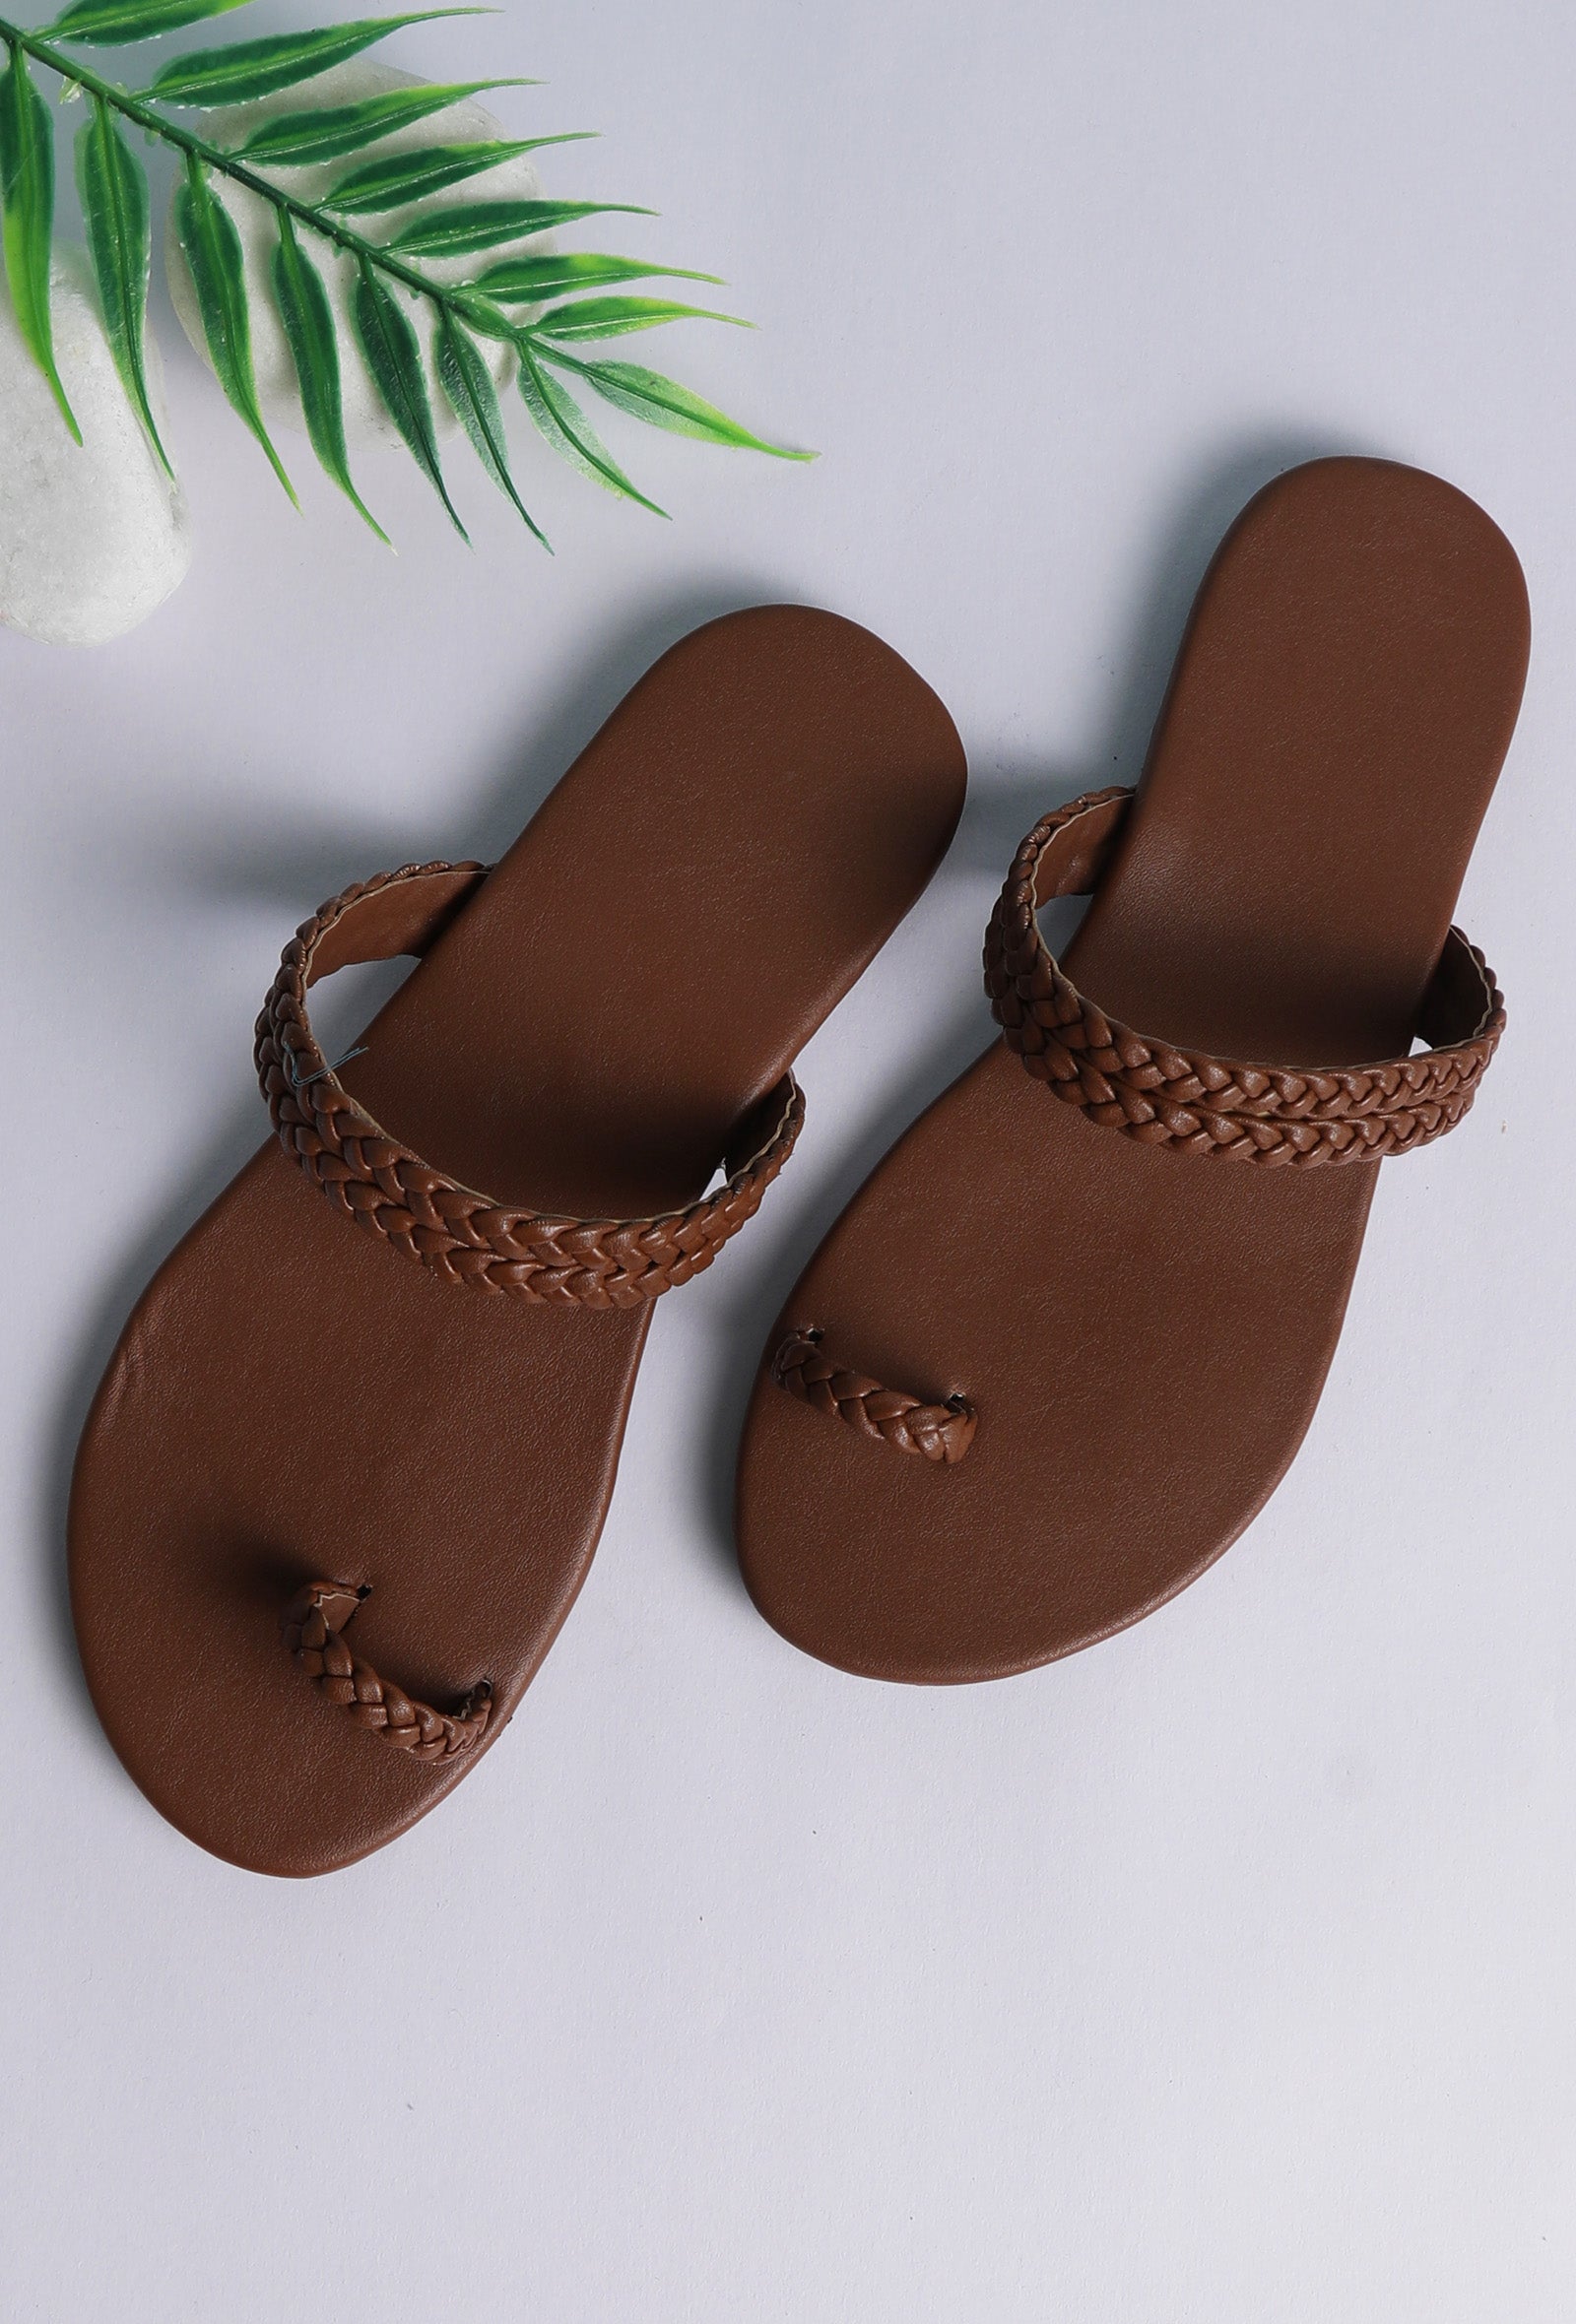 Caramel Brown Knotted Cruelty Free Leather Sandals